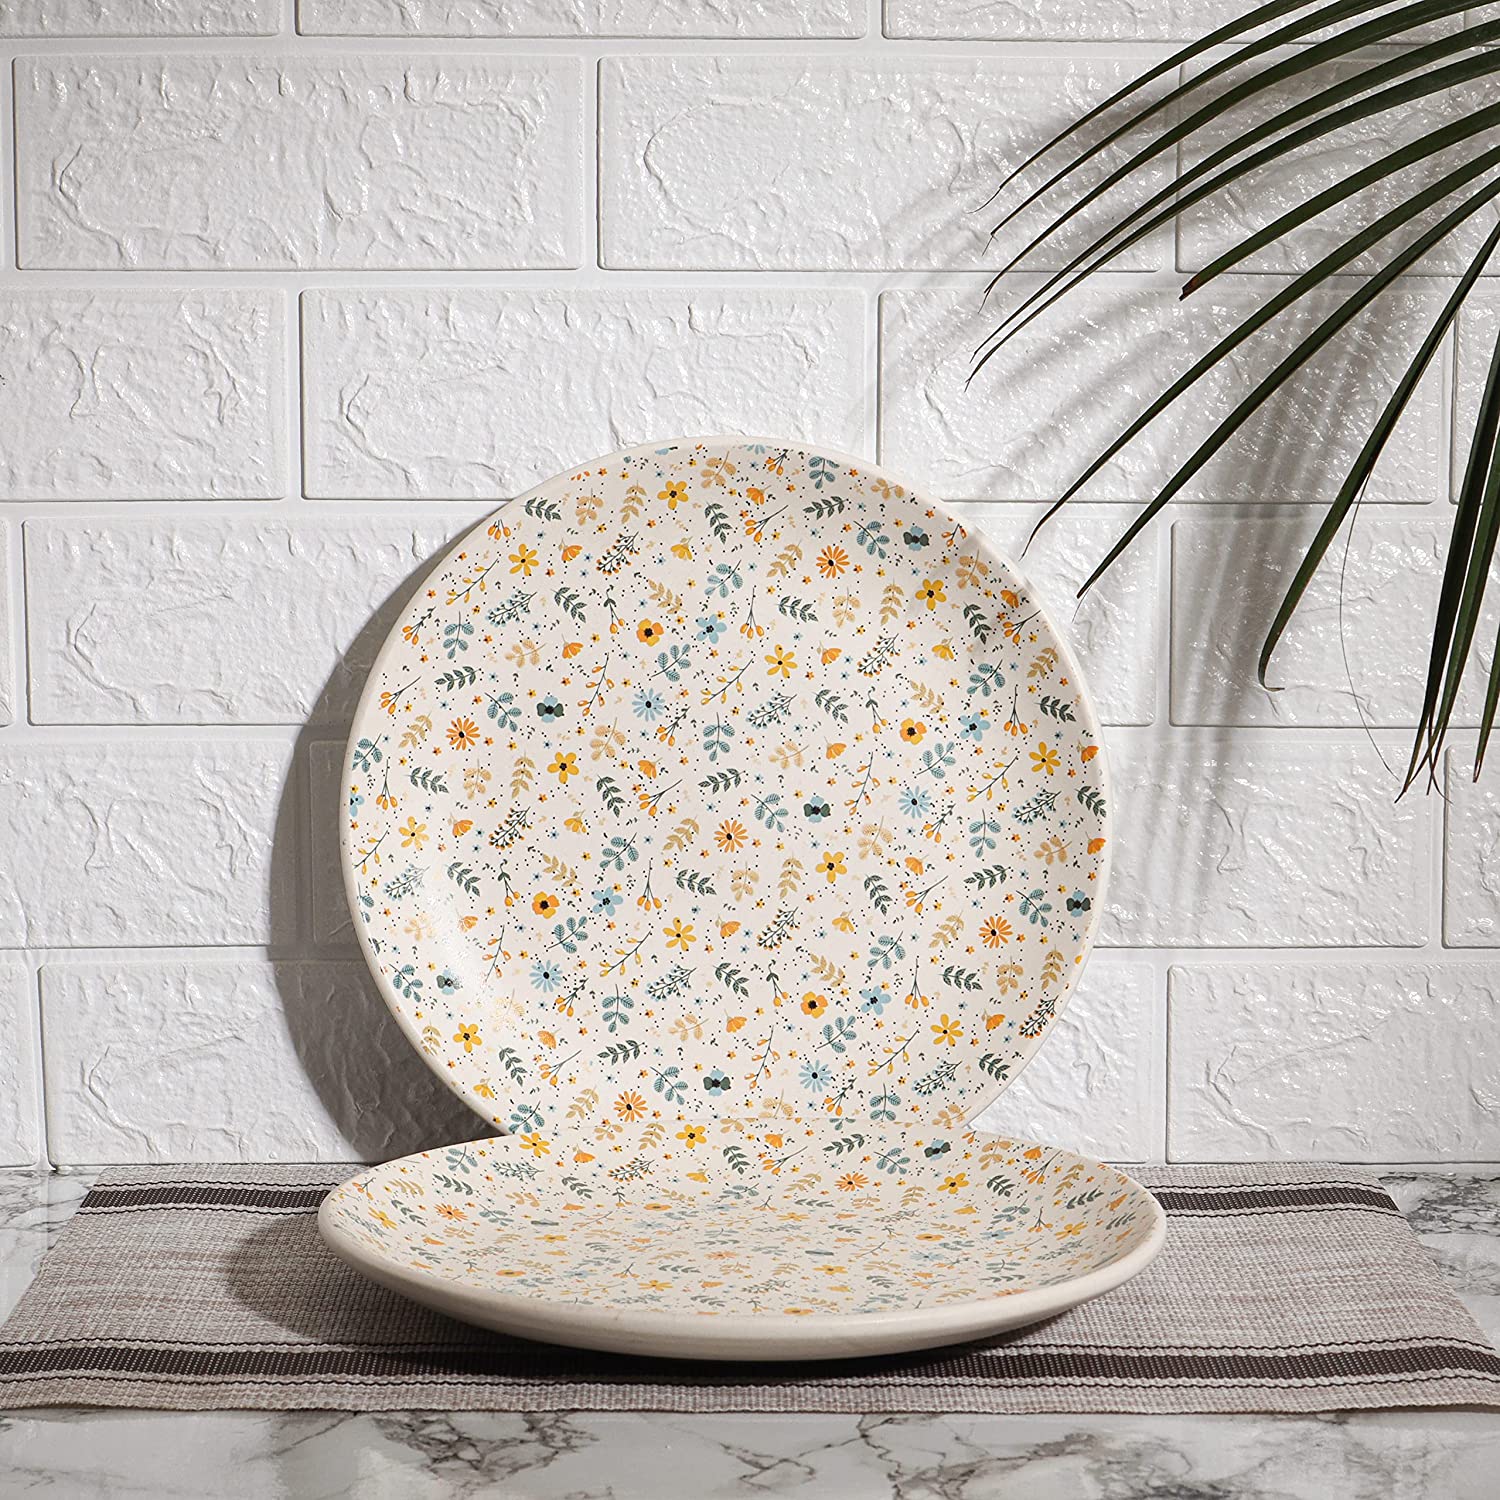 Hand Painted Sun Flower Studio Pottery Ceramic Dining Plate, 10 In, Sunflower (Set of 2, Dishwasher Safe)